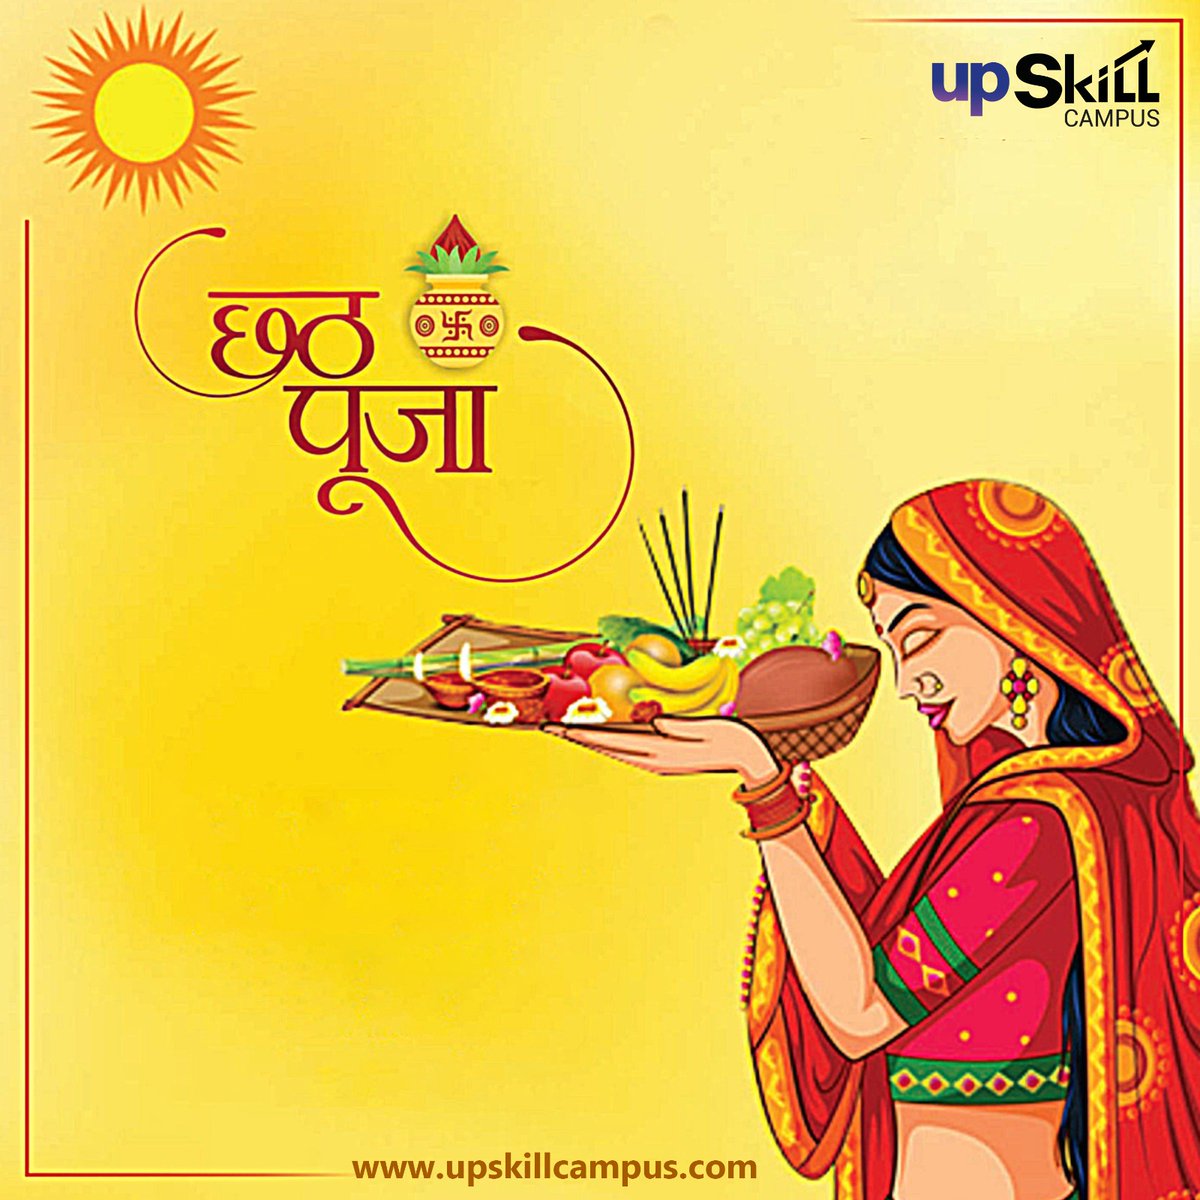 ✨ Celebrating the vibrant festivities of Chhatt Pooja! 🎉✨ Join us as we honor the Sun God and offer our prayers to nature's blessings. 🌞💛 
.
.
#upskillcampus #edtech #ChhattPooja #FestiveVibes #NatureLove #SacredTraditions #InstaCelebration #Devotion #Blessings #Tradition